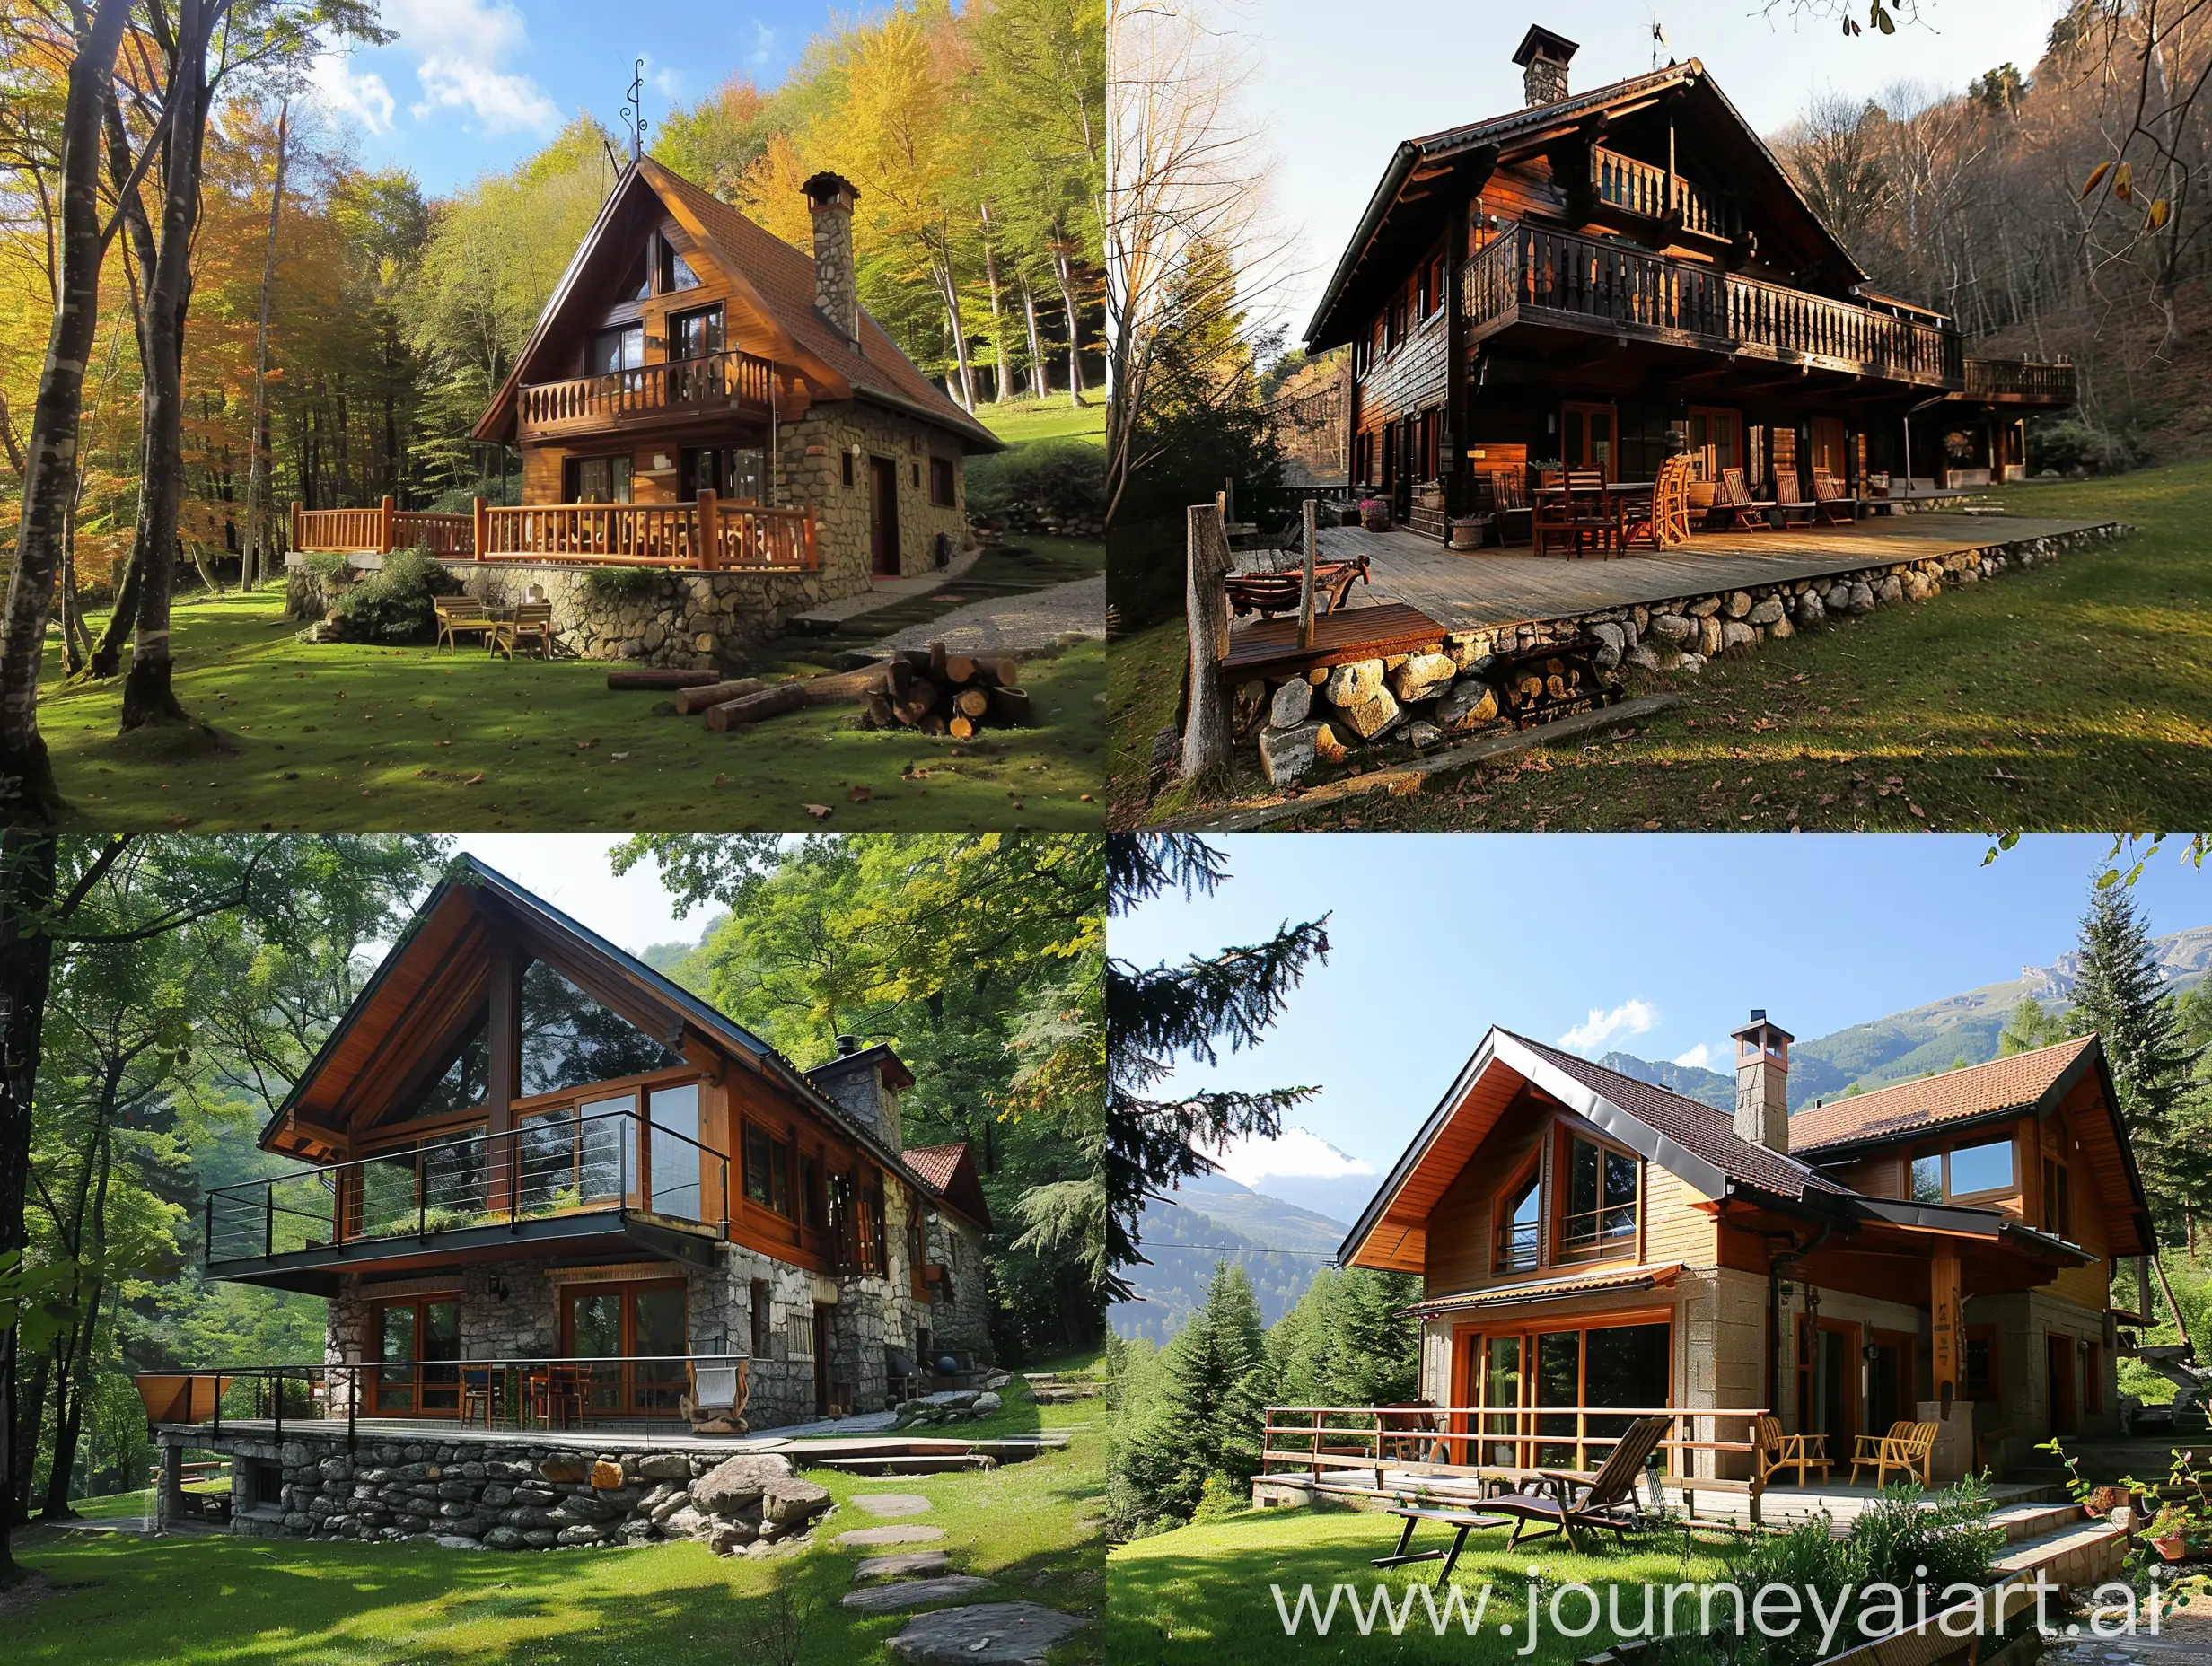 BELLA VEIU, vacation home rental in the woods or mountain.